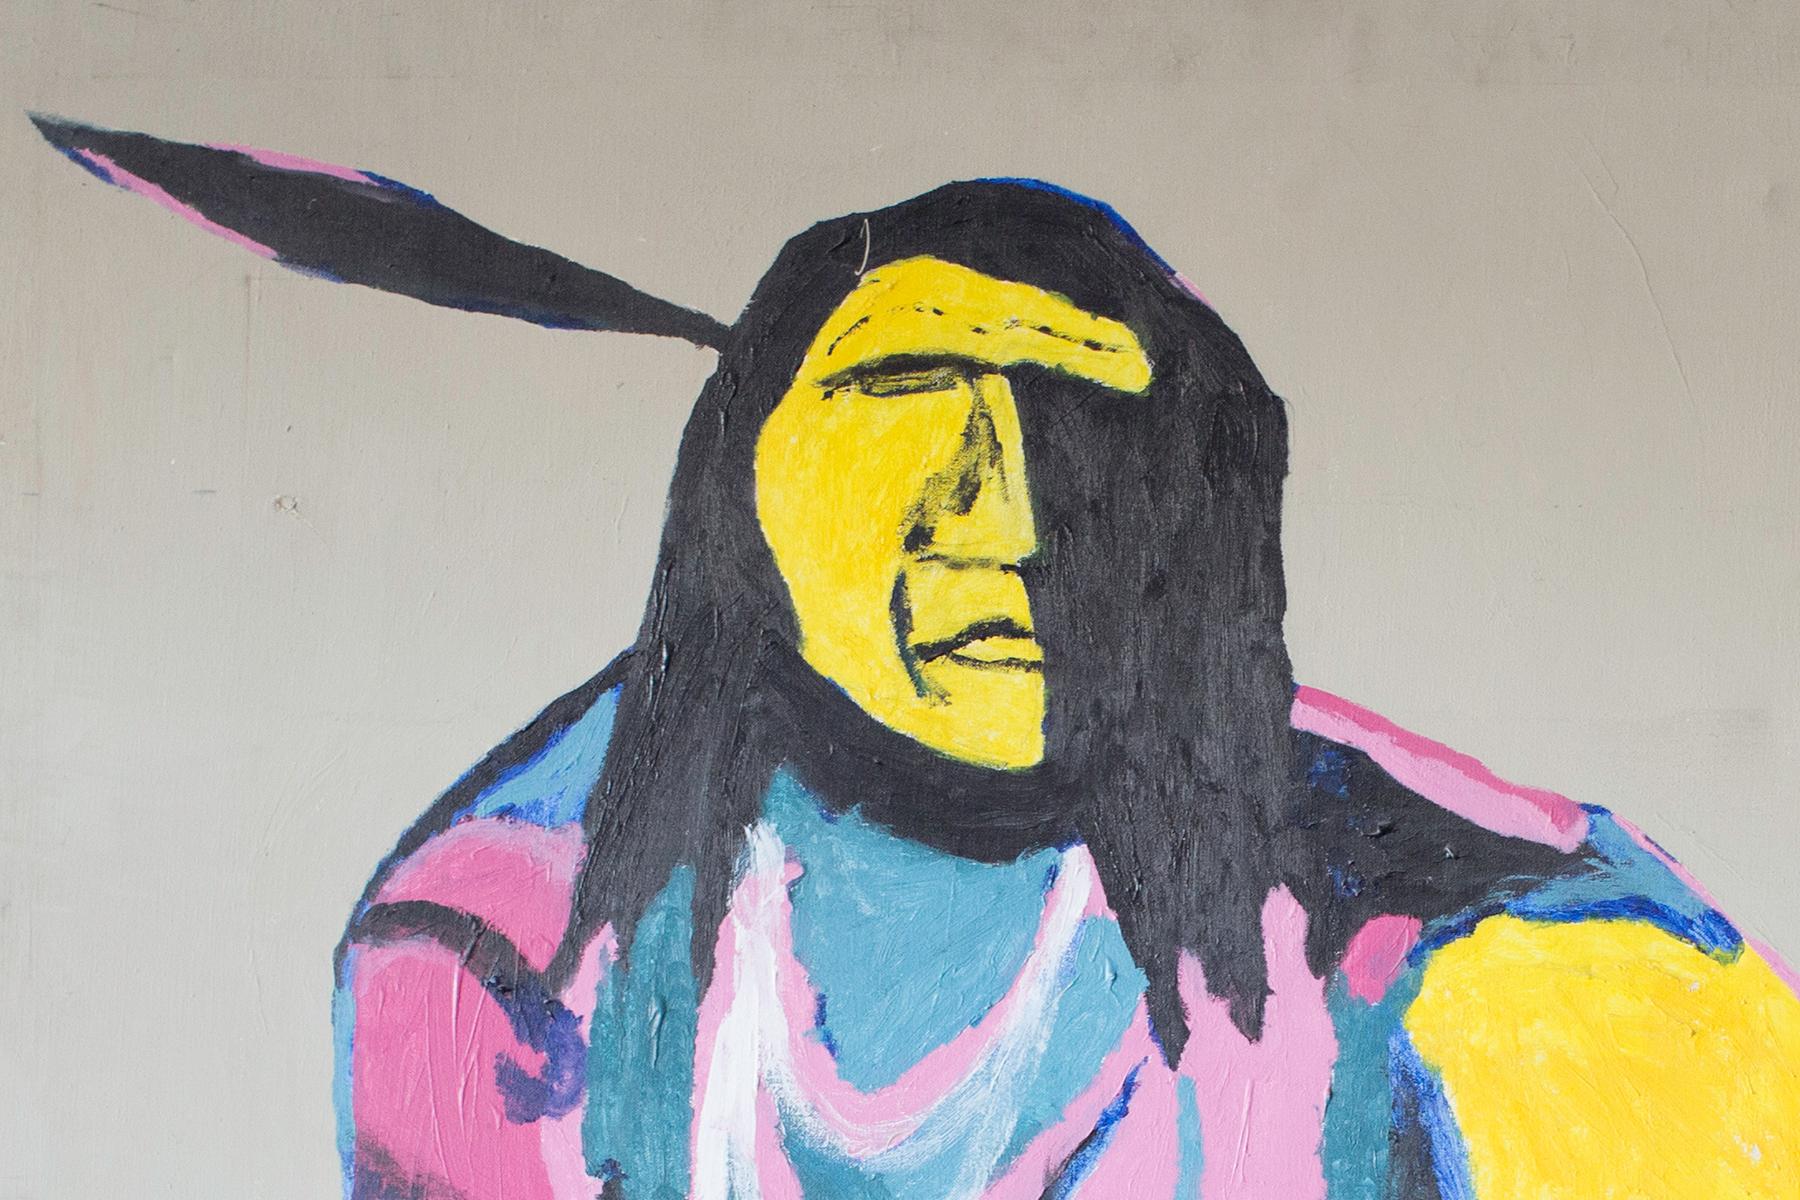 Midcentury native American painting, circa late 1960s. This signed example seamlessly melds pop with stoicism much like the works of Fritz Scholder.